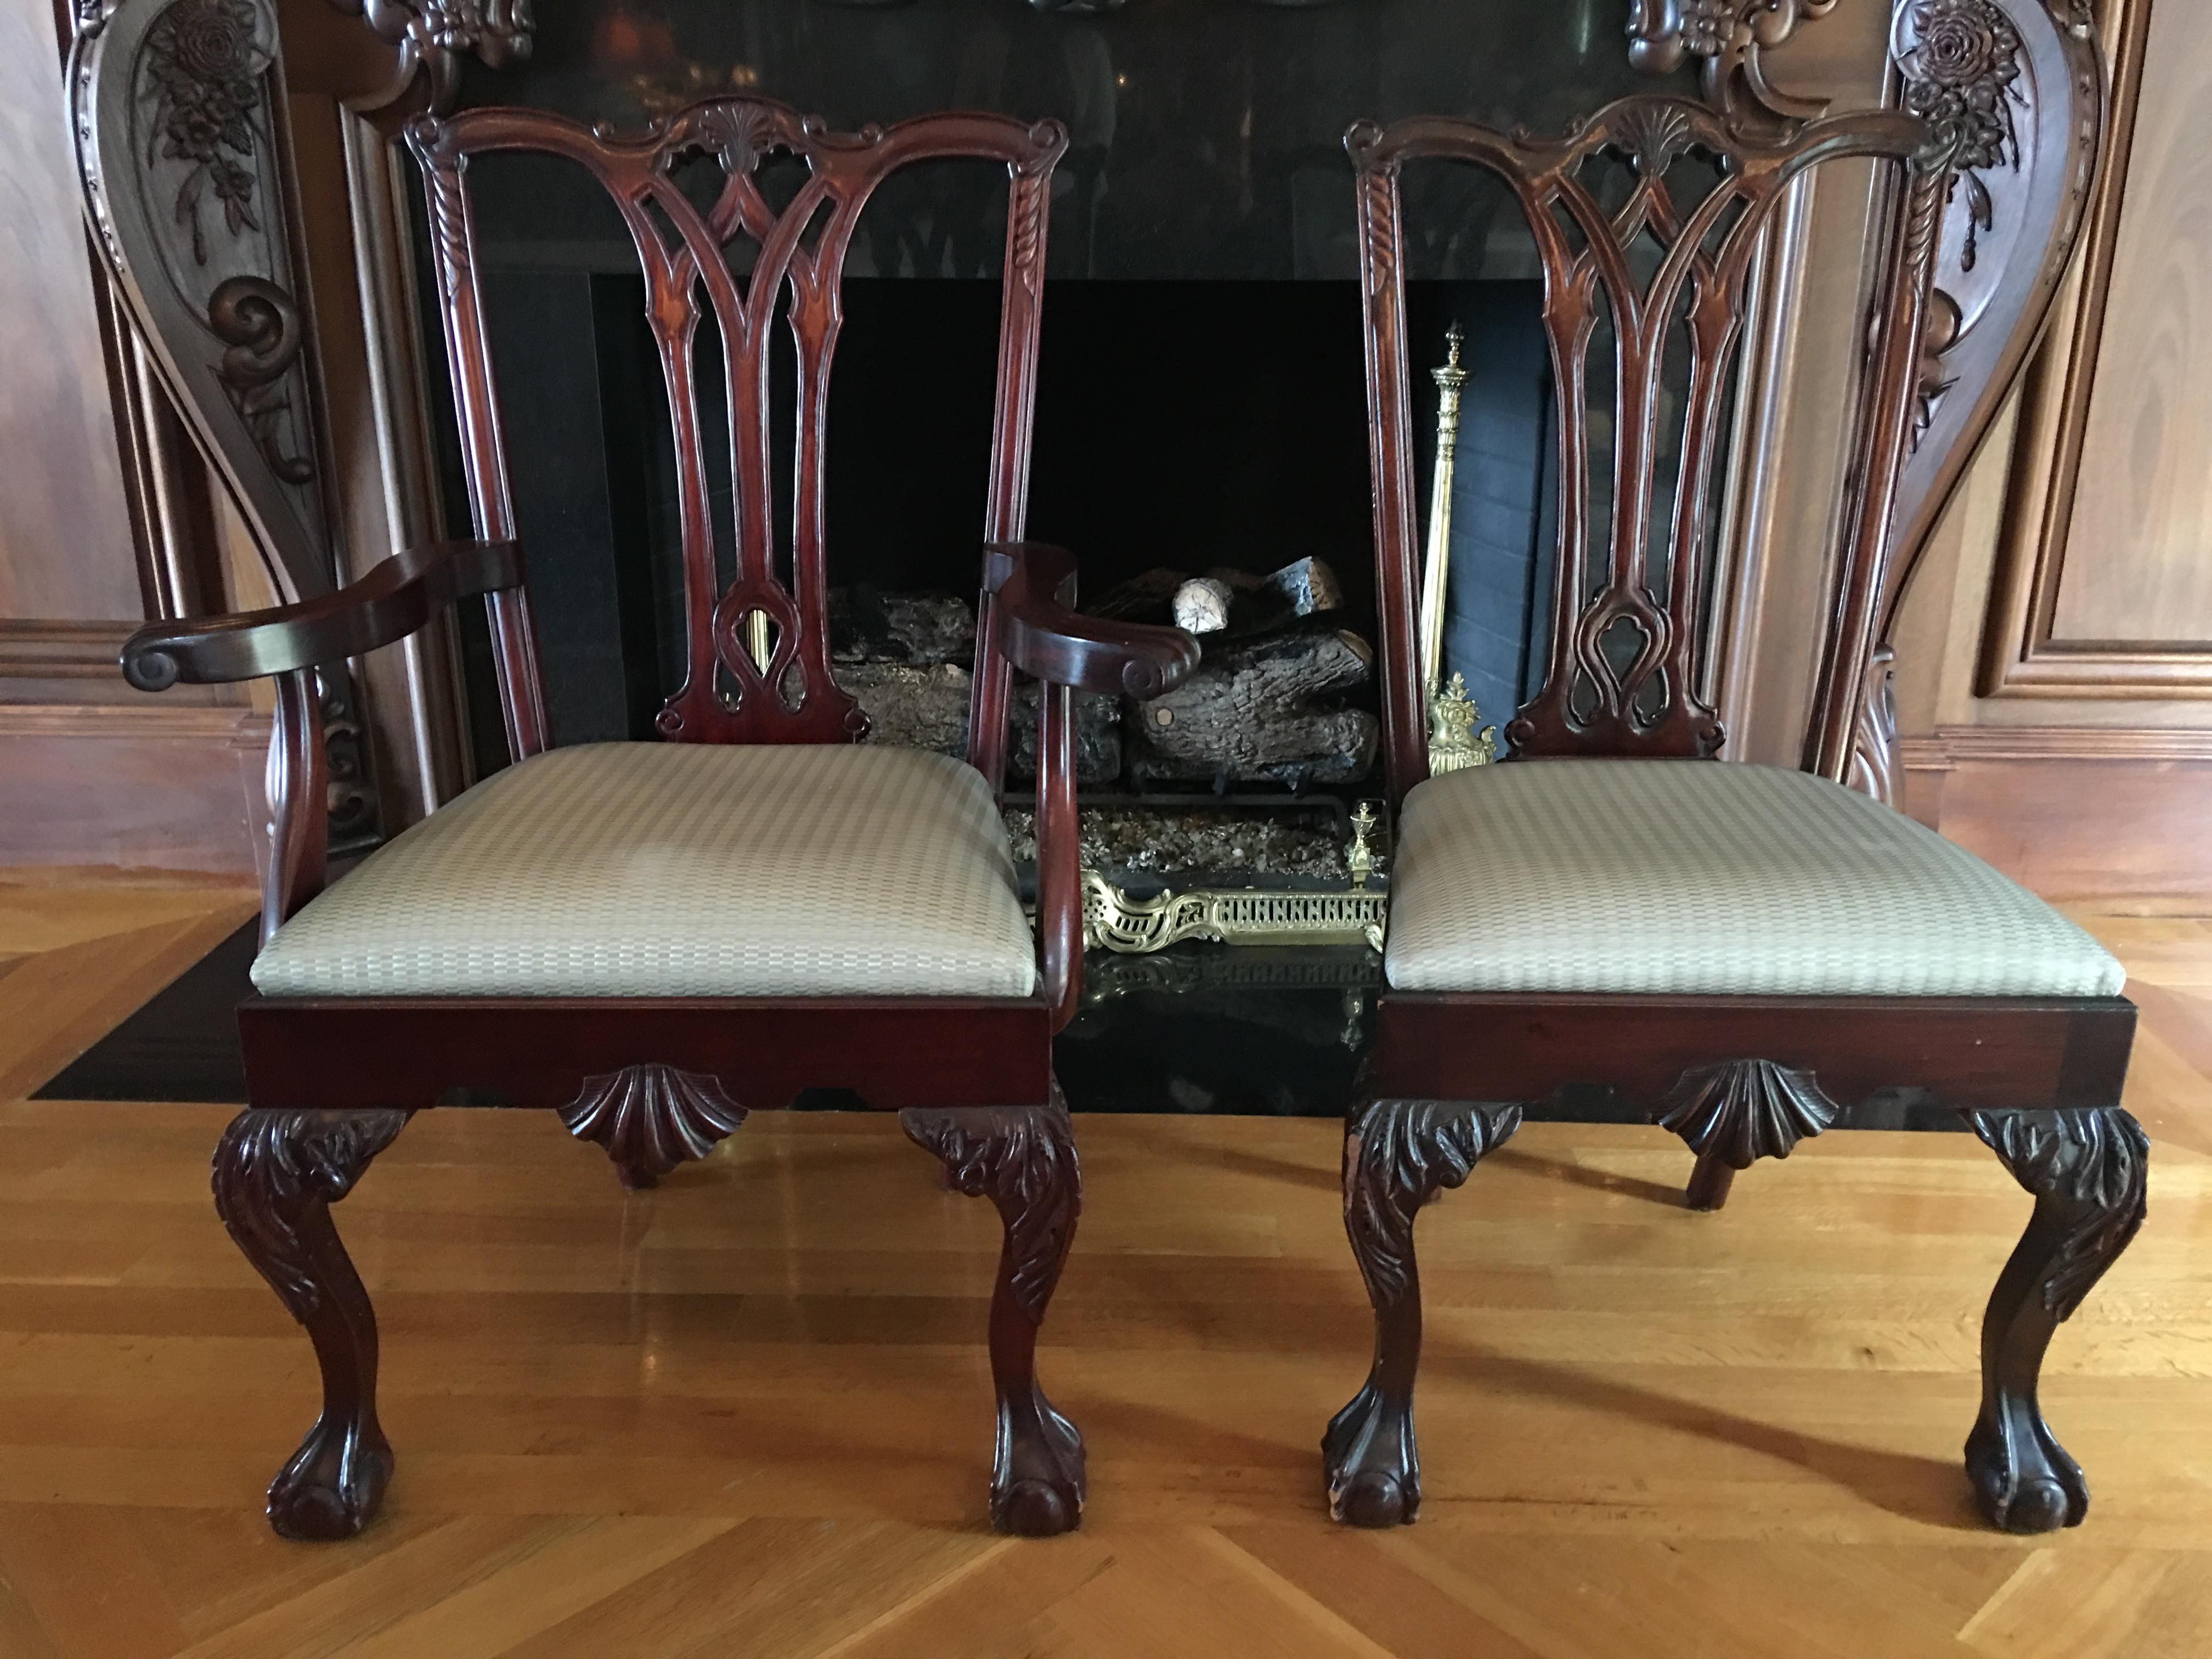 20th century set of eight Chippendale chairs, set composed by 6 side chairs and two armchairs. Dimensions: Side – 17.5” D x 41” H x 30.5” W / Arm 19” D x 40.75” H x 30.5” W.
 